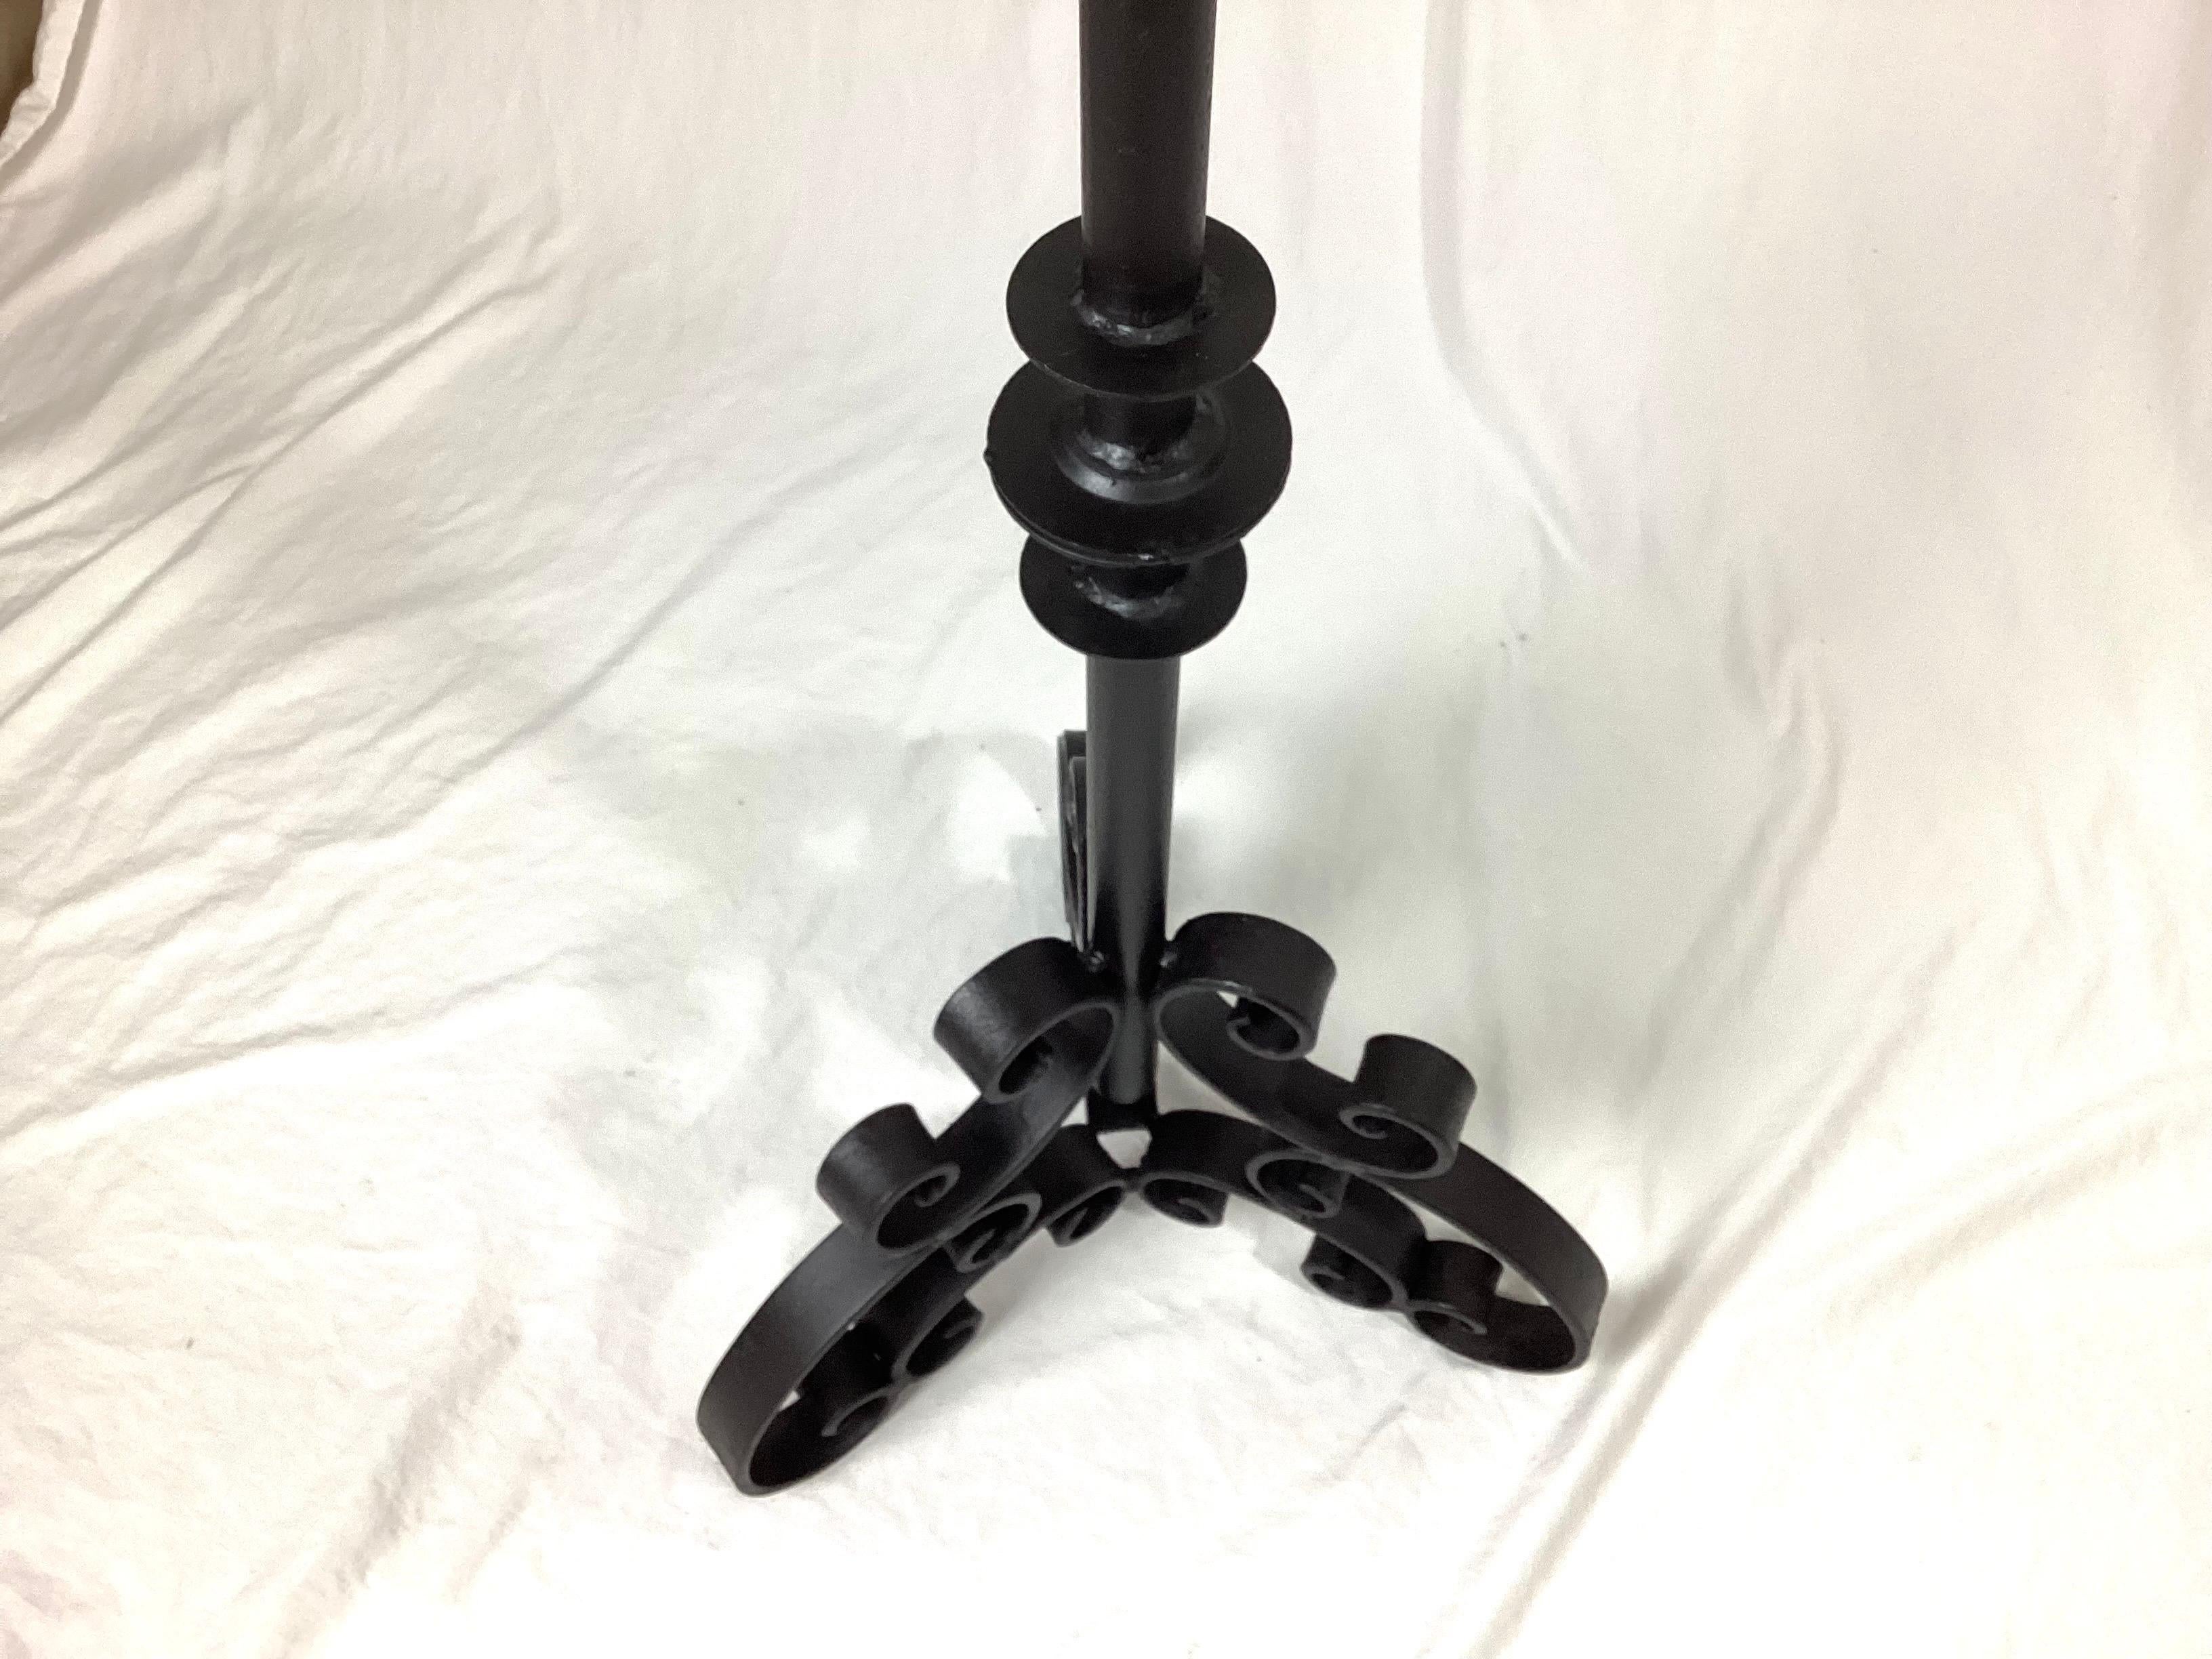 Late 1800's Iron Adjustable Music Stand with Candle Holders For Sale 2